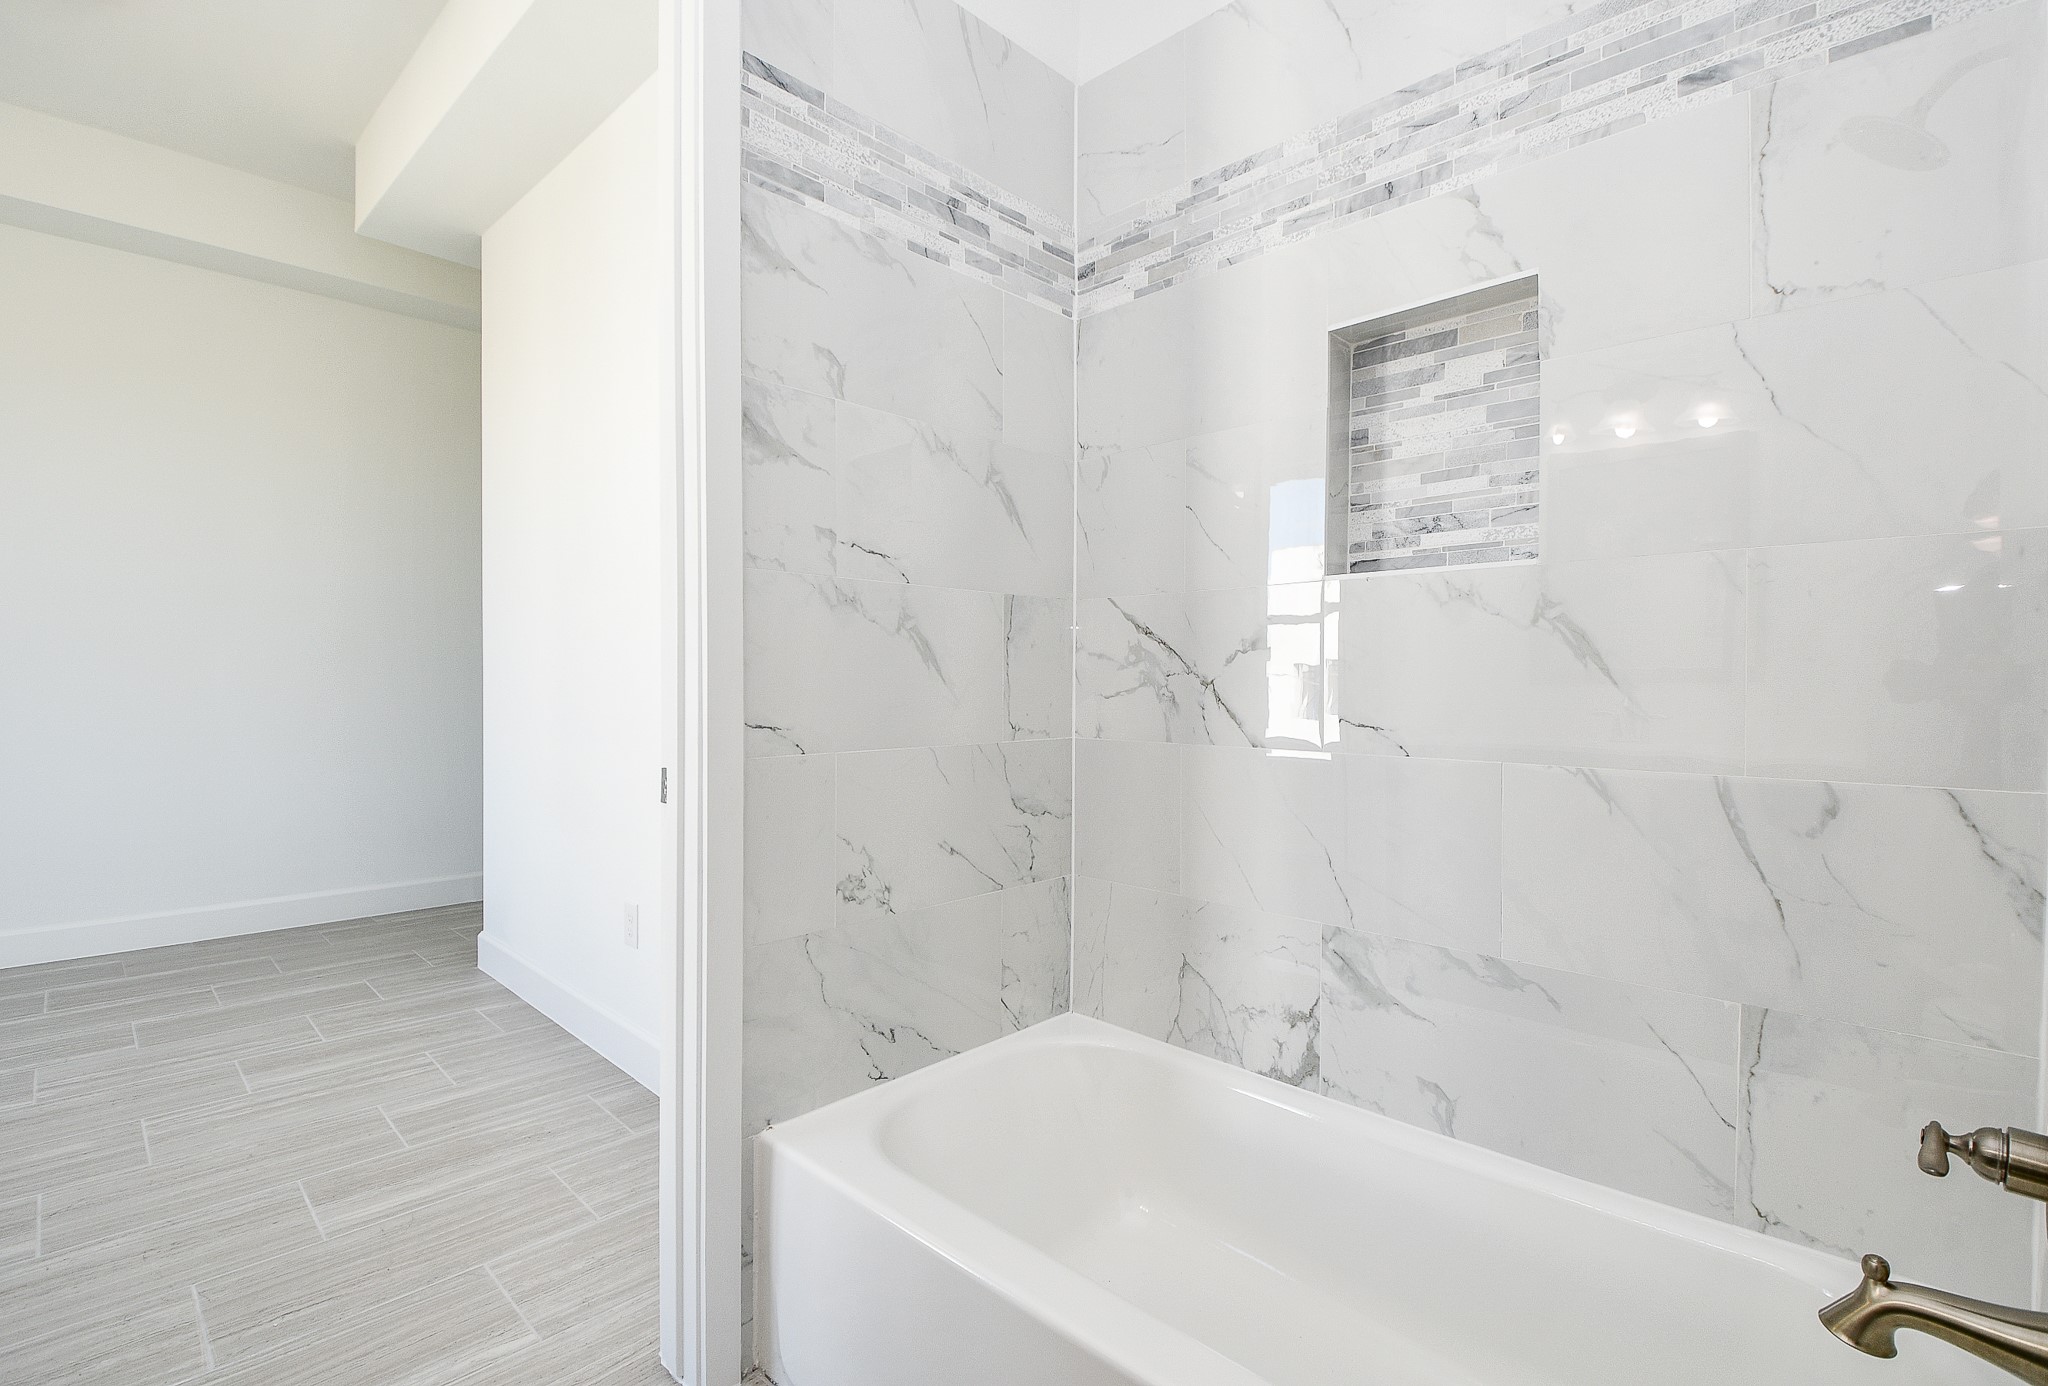 Exquisite marble patterned tile surround and mosaic tile-like accents kick the luxury up a notch in this secondary bathroom.